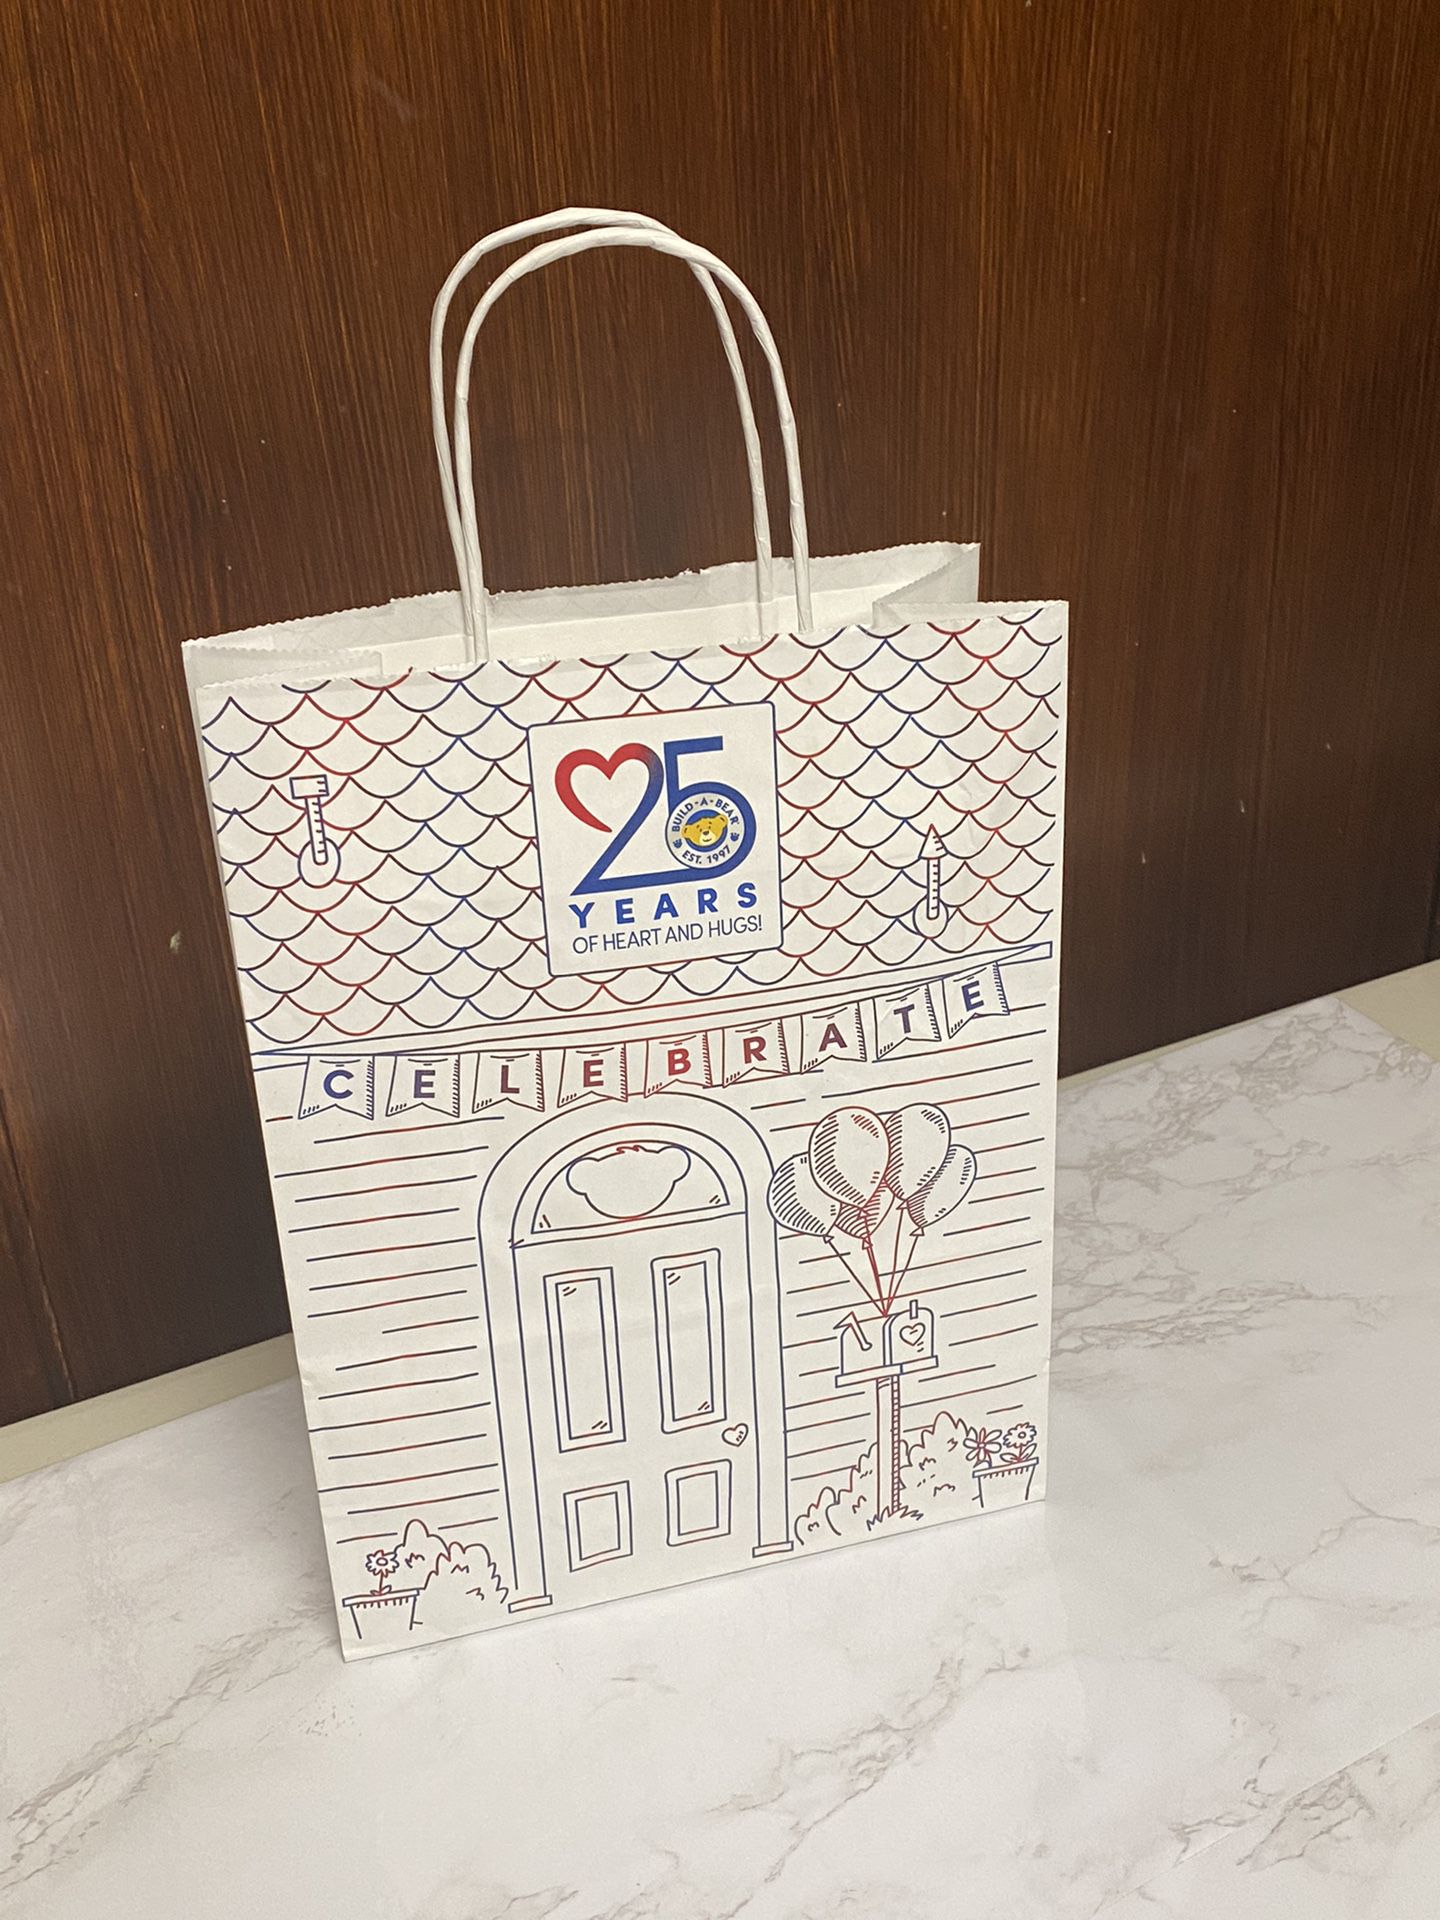  Build-A-Bear Workshop Reusable Gift bag - 25 YEARS OF HEART AND HUGS